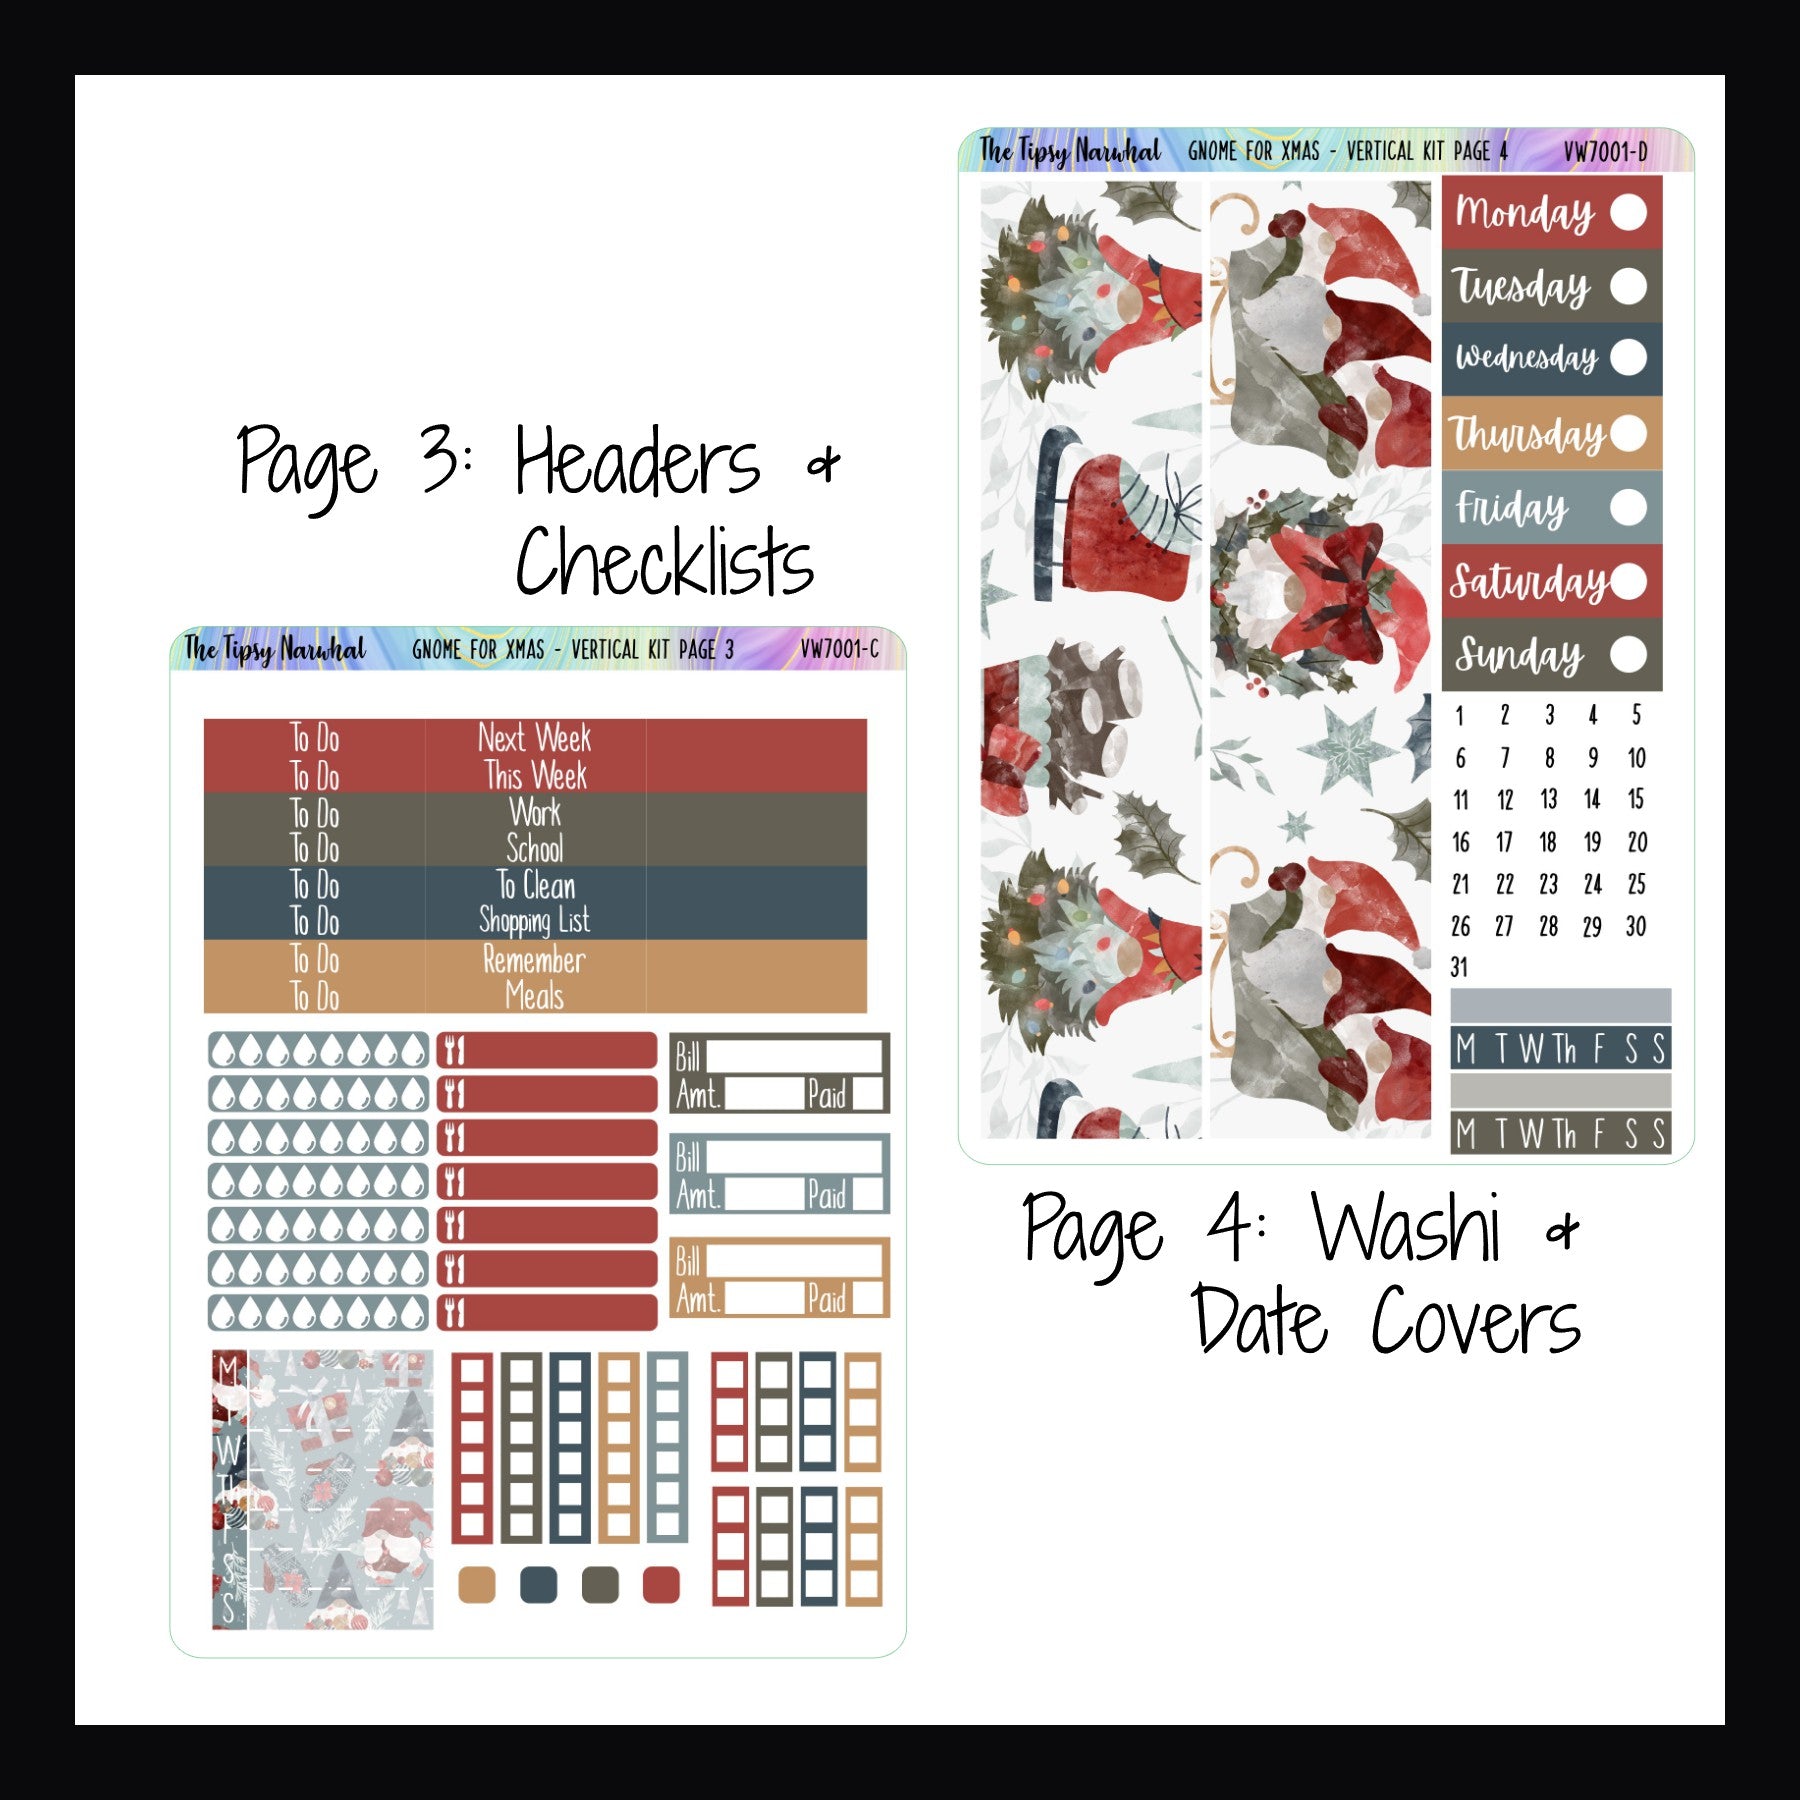 Gnome for Xmas Vertical Weekly Kit Pages 3 and 4.  Page 3 features various header boxes, water tracking, meal tracking, bill tracking stickers, a full week sticker and multiple checklists.  Page 4 features two large washi strips, date covers, date sticker and habit tracking stickers. 